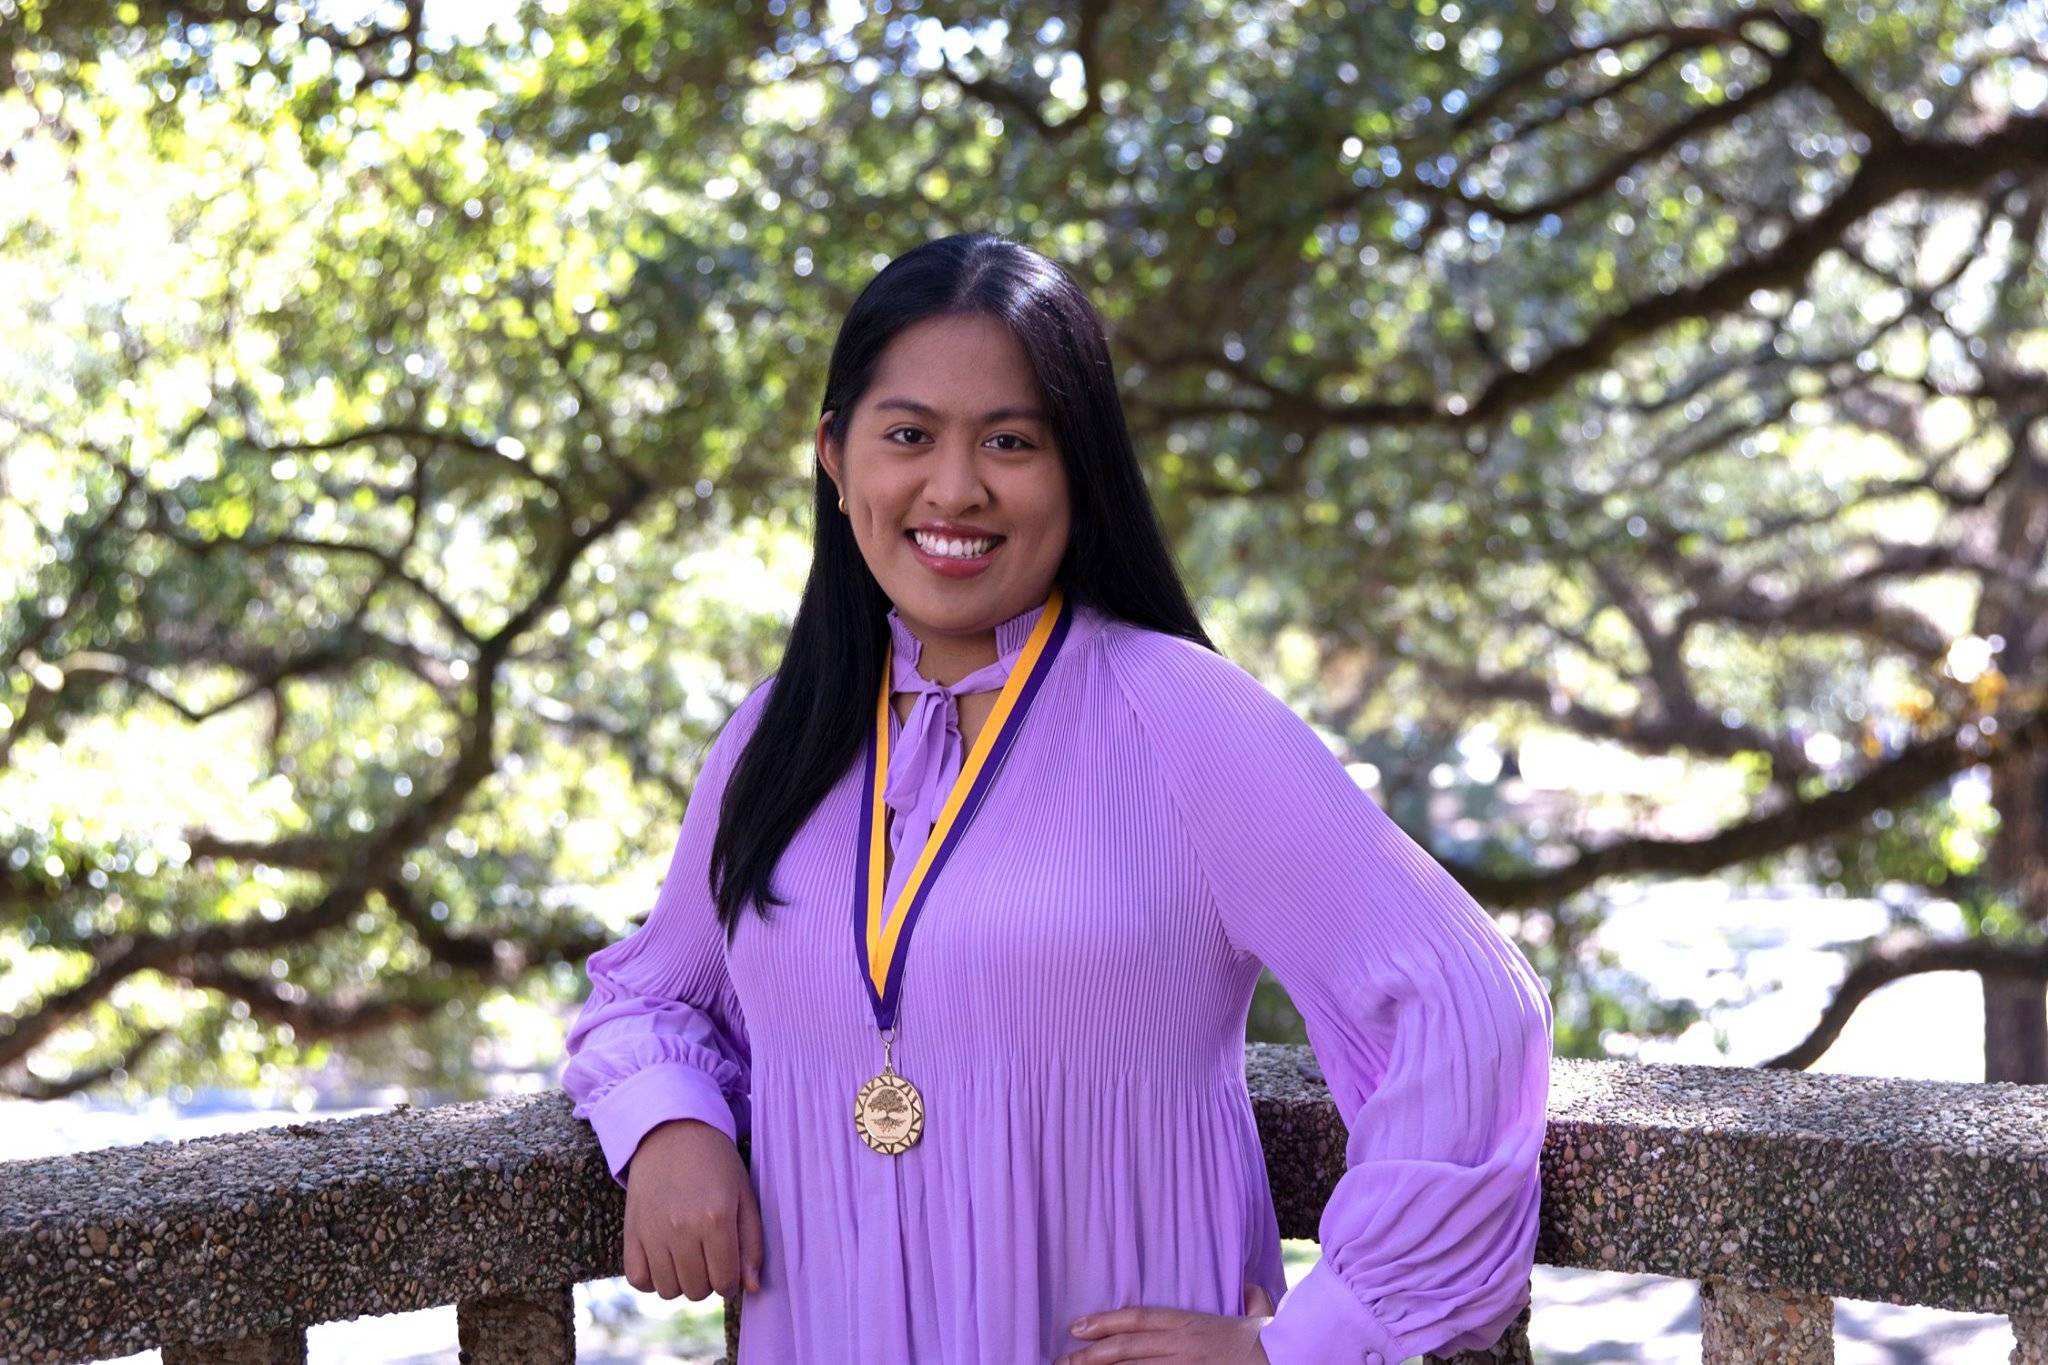 Mae Anne Mangaoil from the waist up, smiling, wearing a long-sleeved purple shirt and a medal with purple and gold ribbon around her neck, outdoors in front of a tree